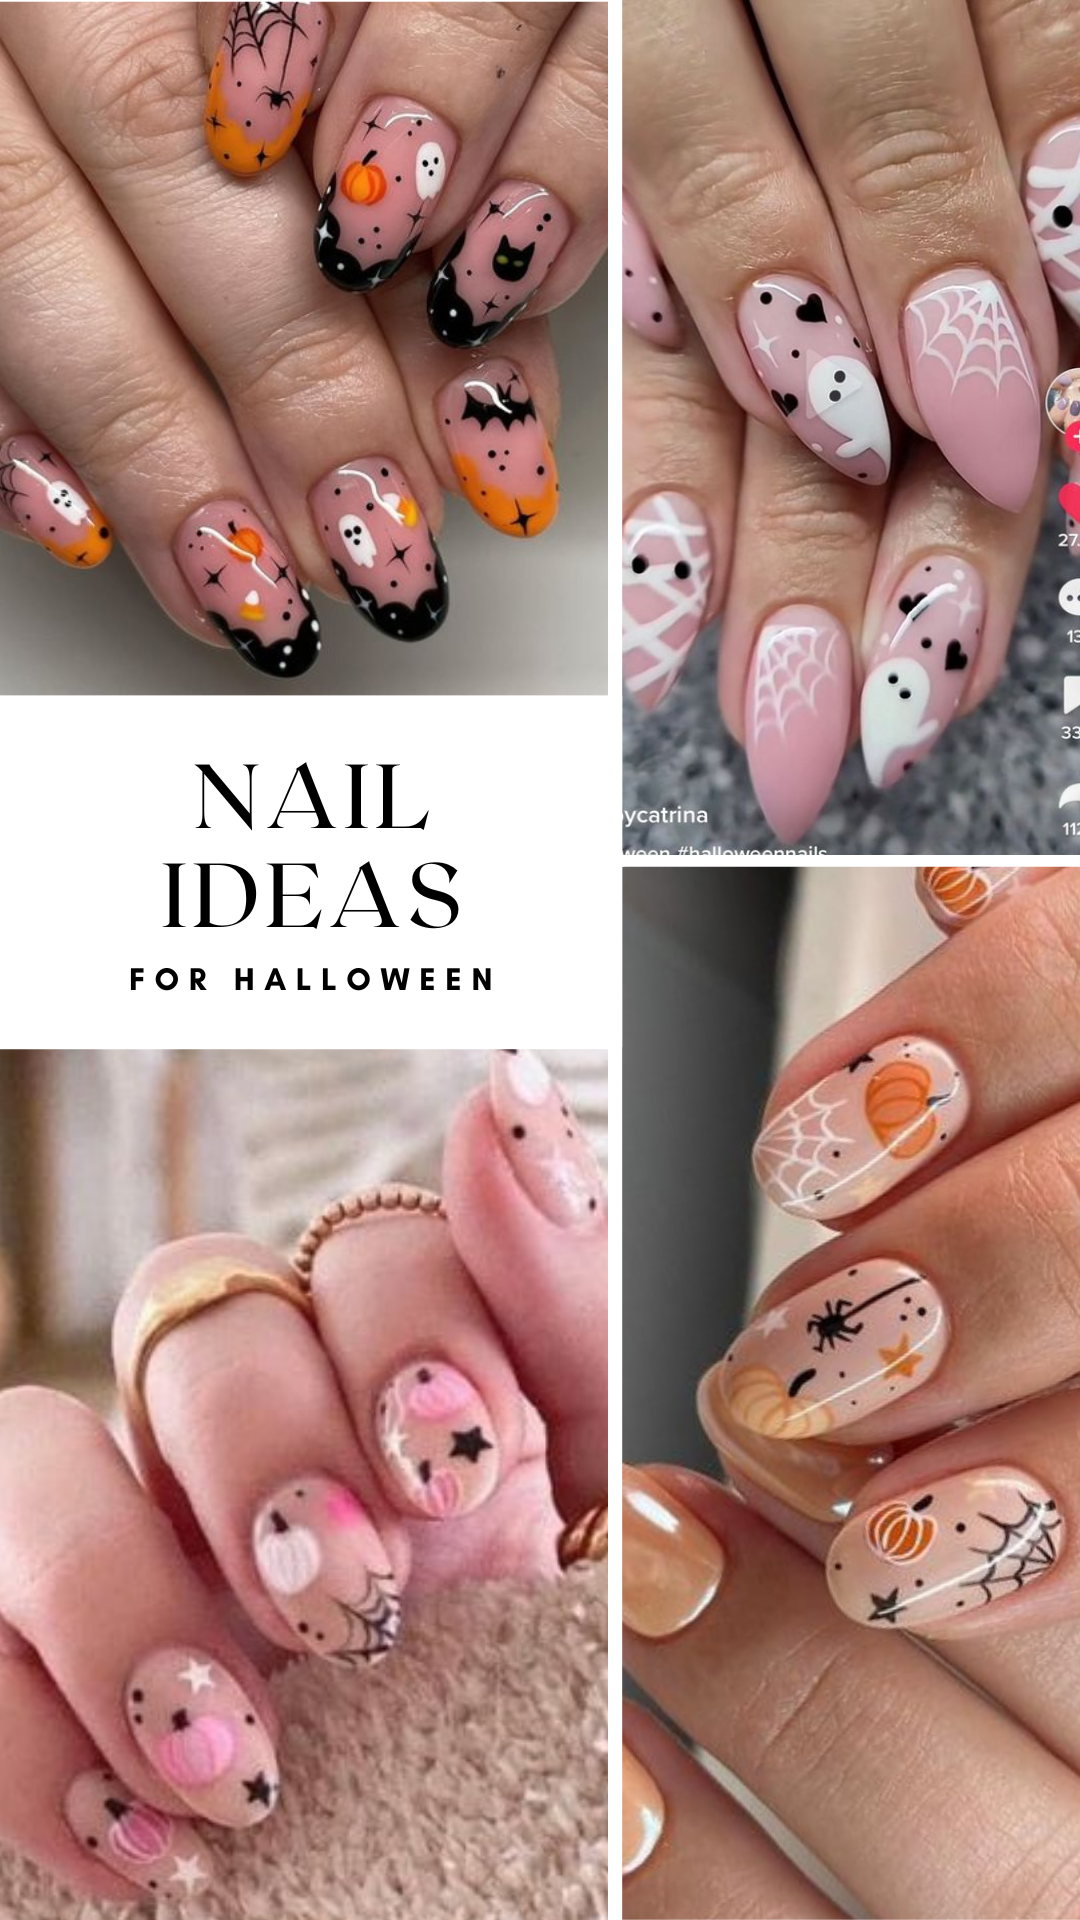 Halloween nails are so much fun! To help you get ready for this spooky holiday, I've put together a list of 25 amazing Halloween nail ideas. #nails #nailart #Halloween